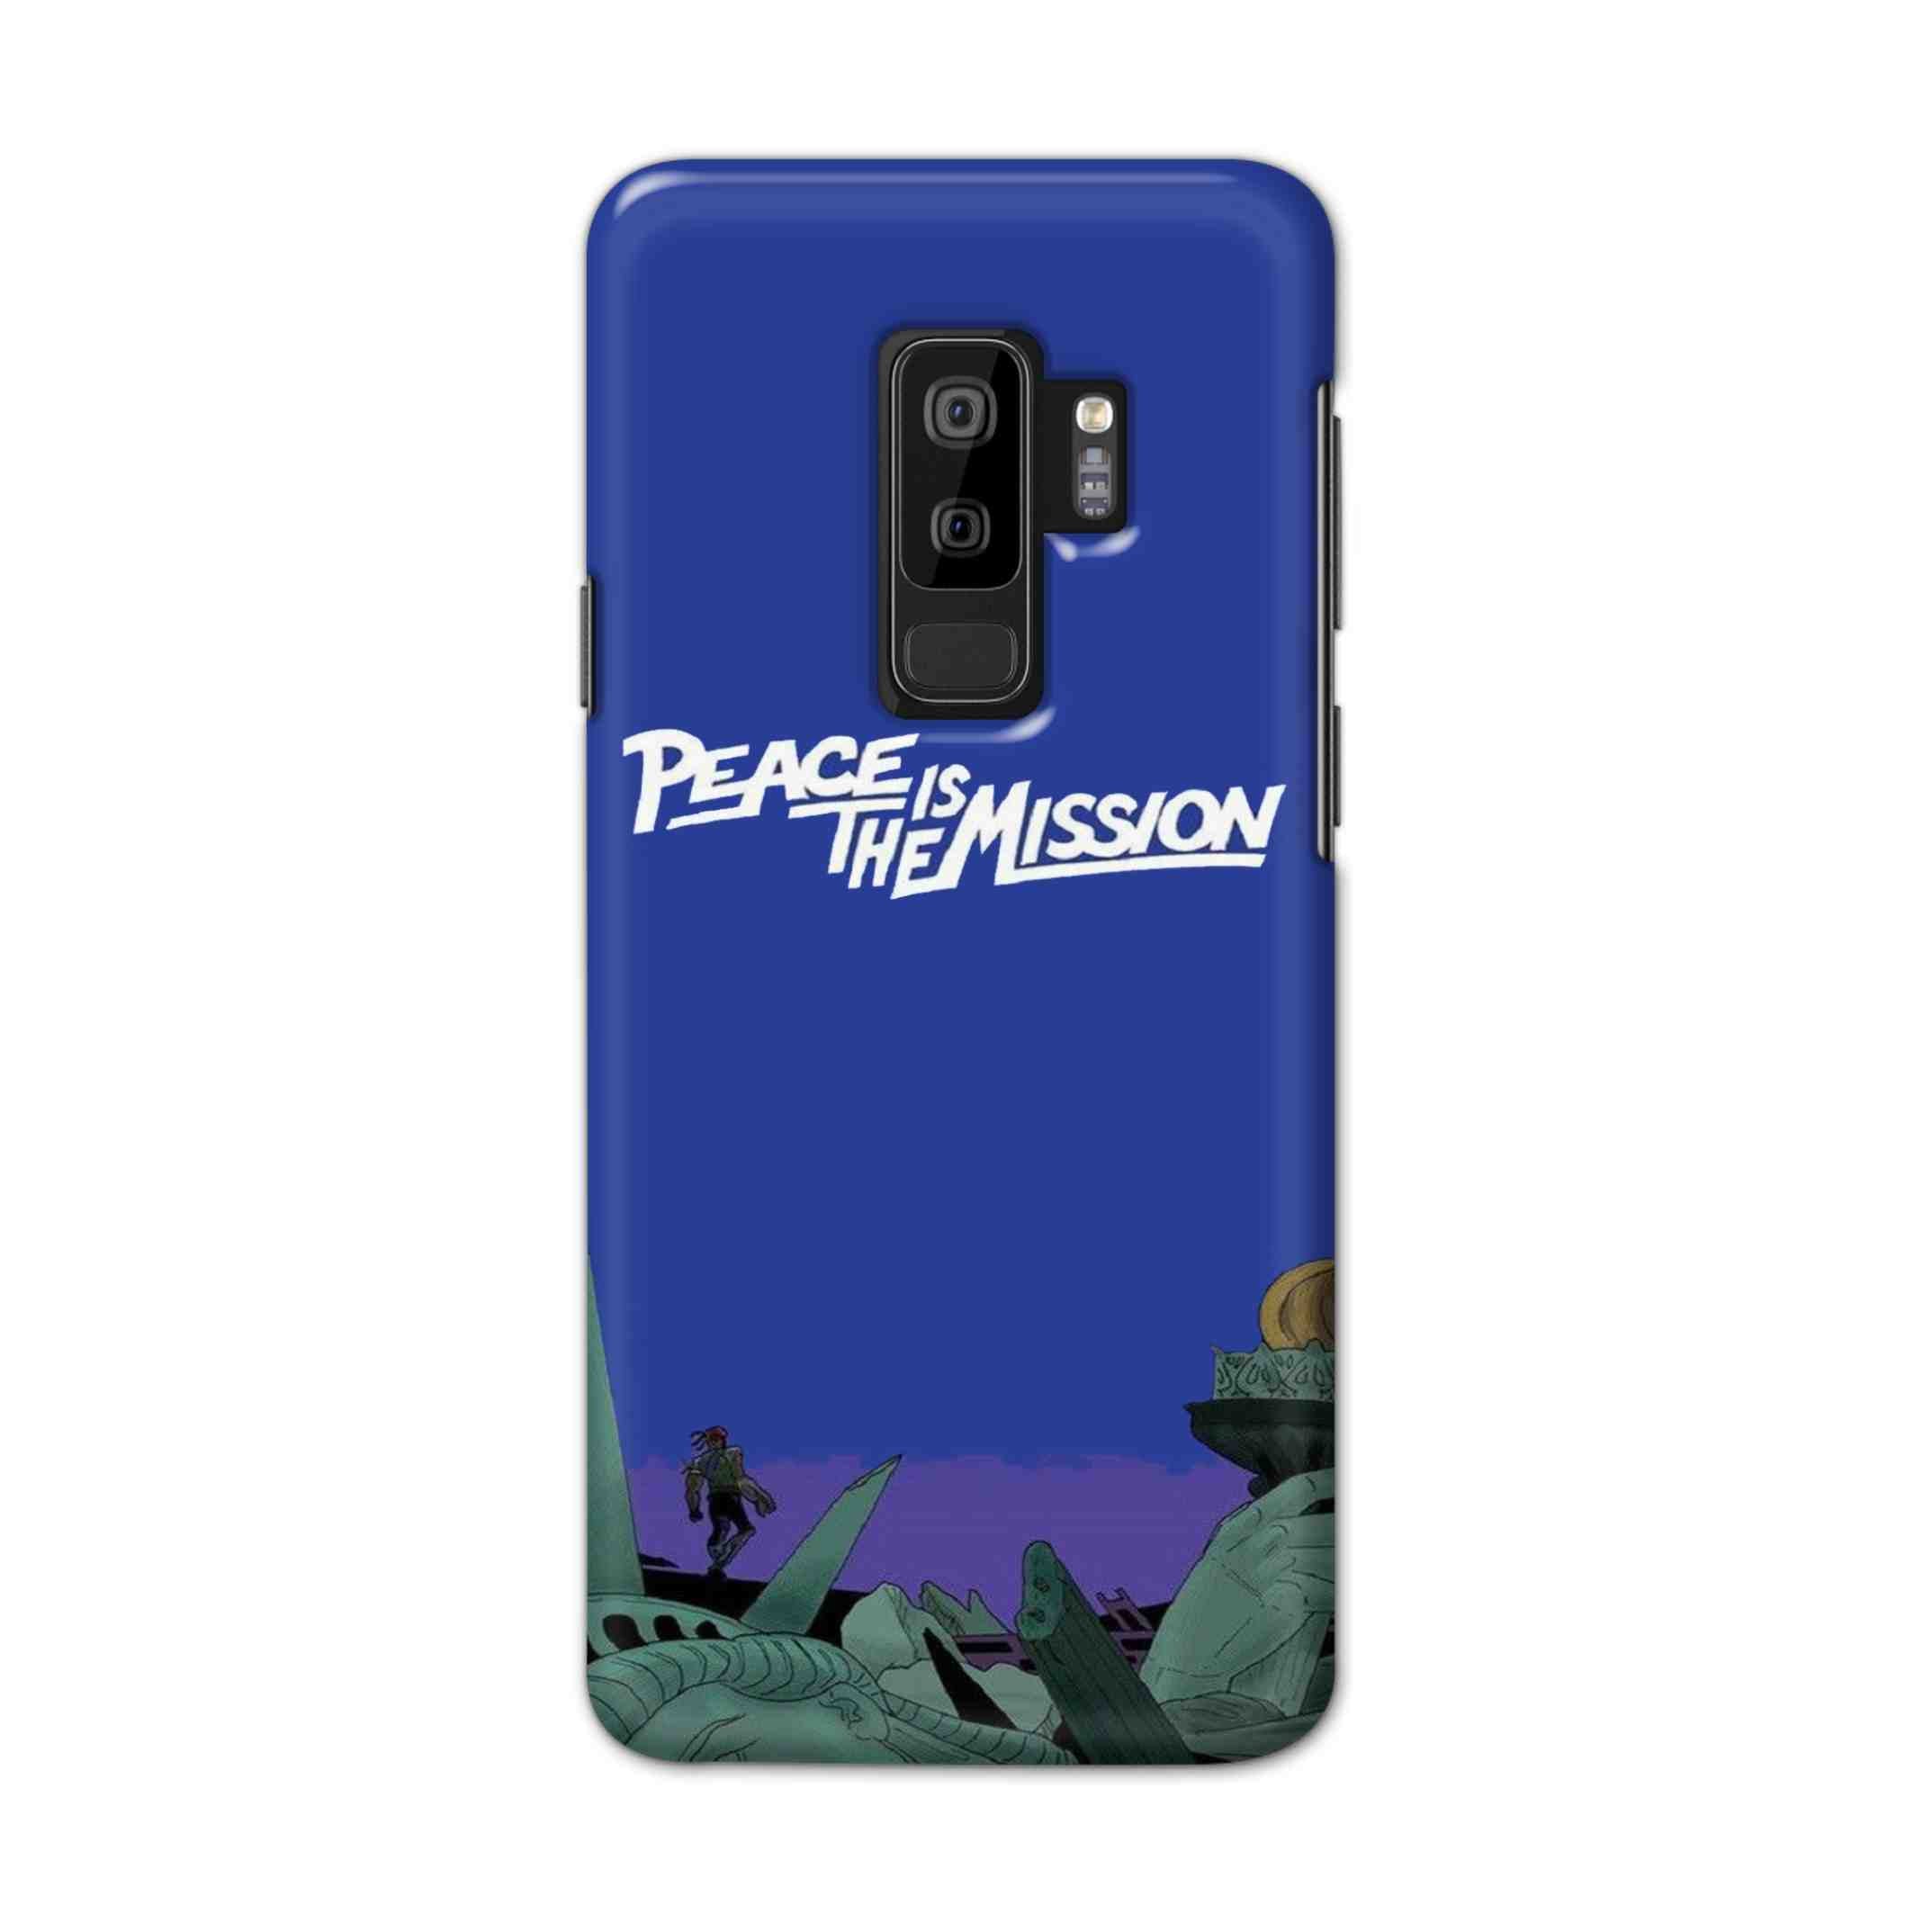 Buy Peace Is The Misson Hard Back Mobile Phone Case Cover For Samsung S9 plus Online